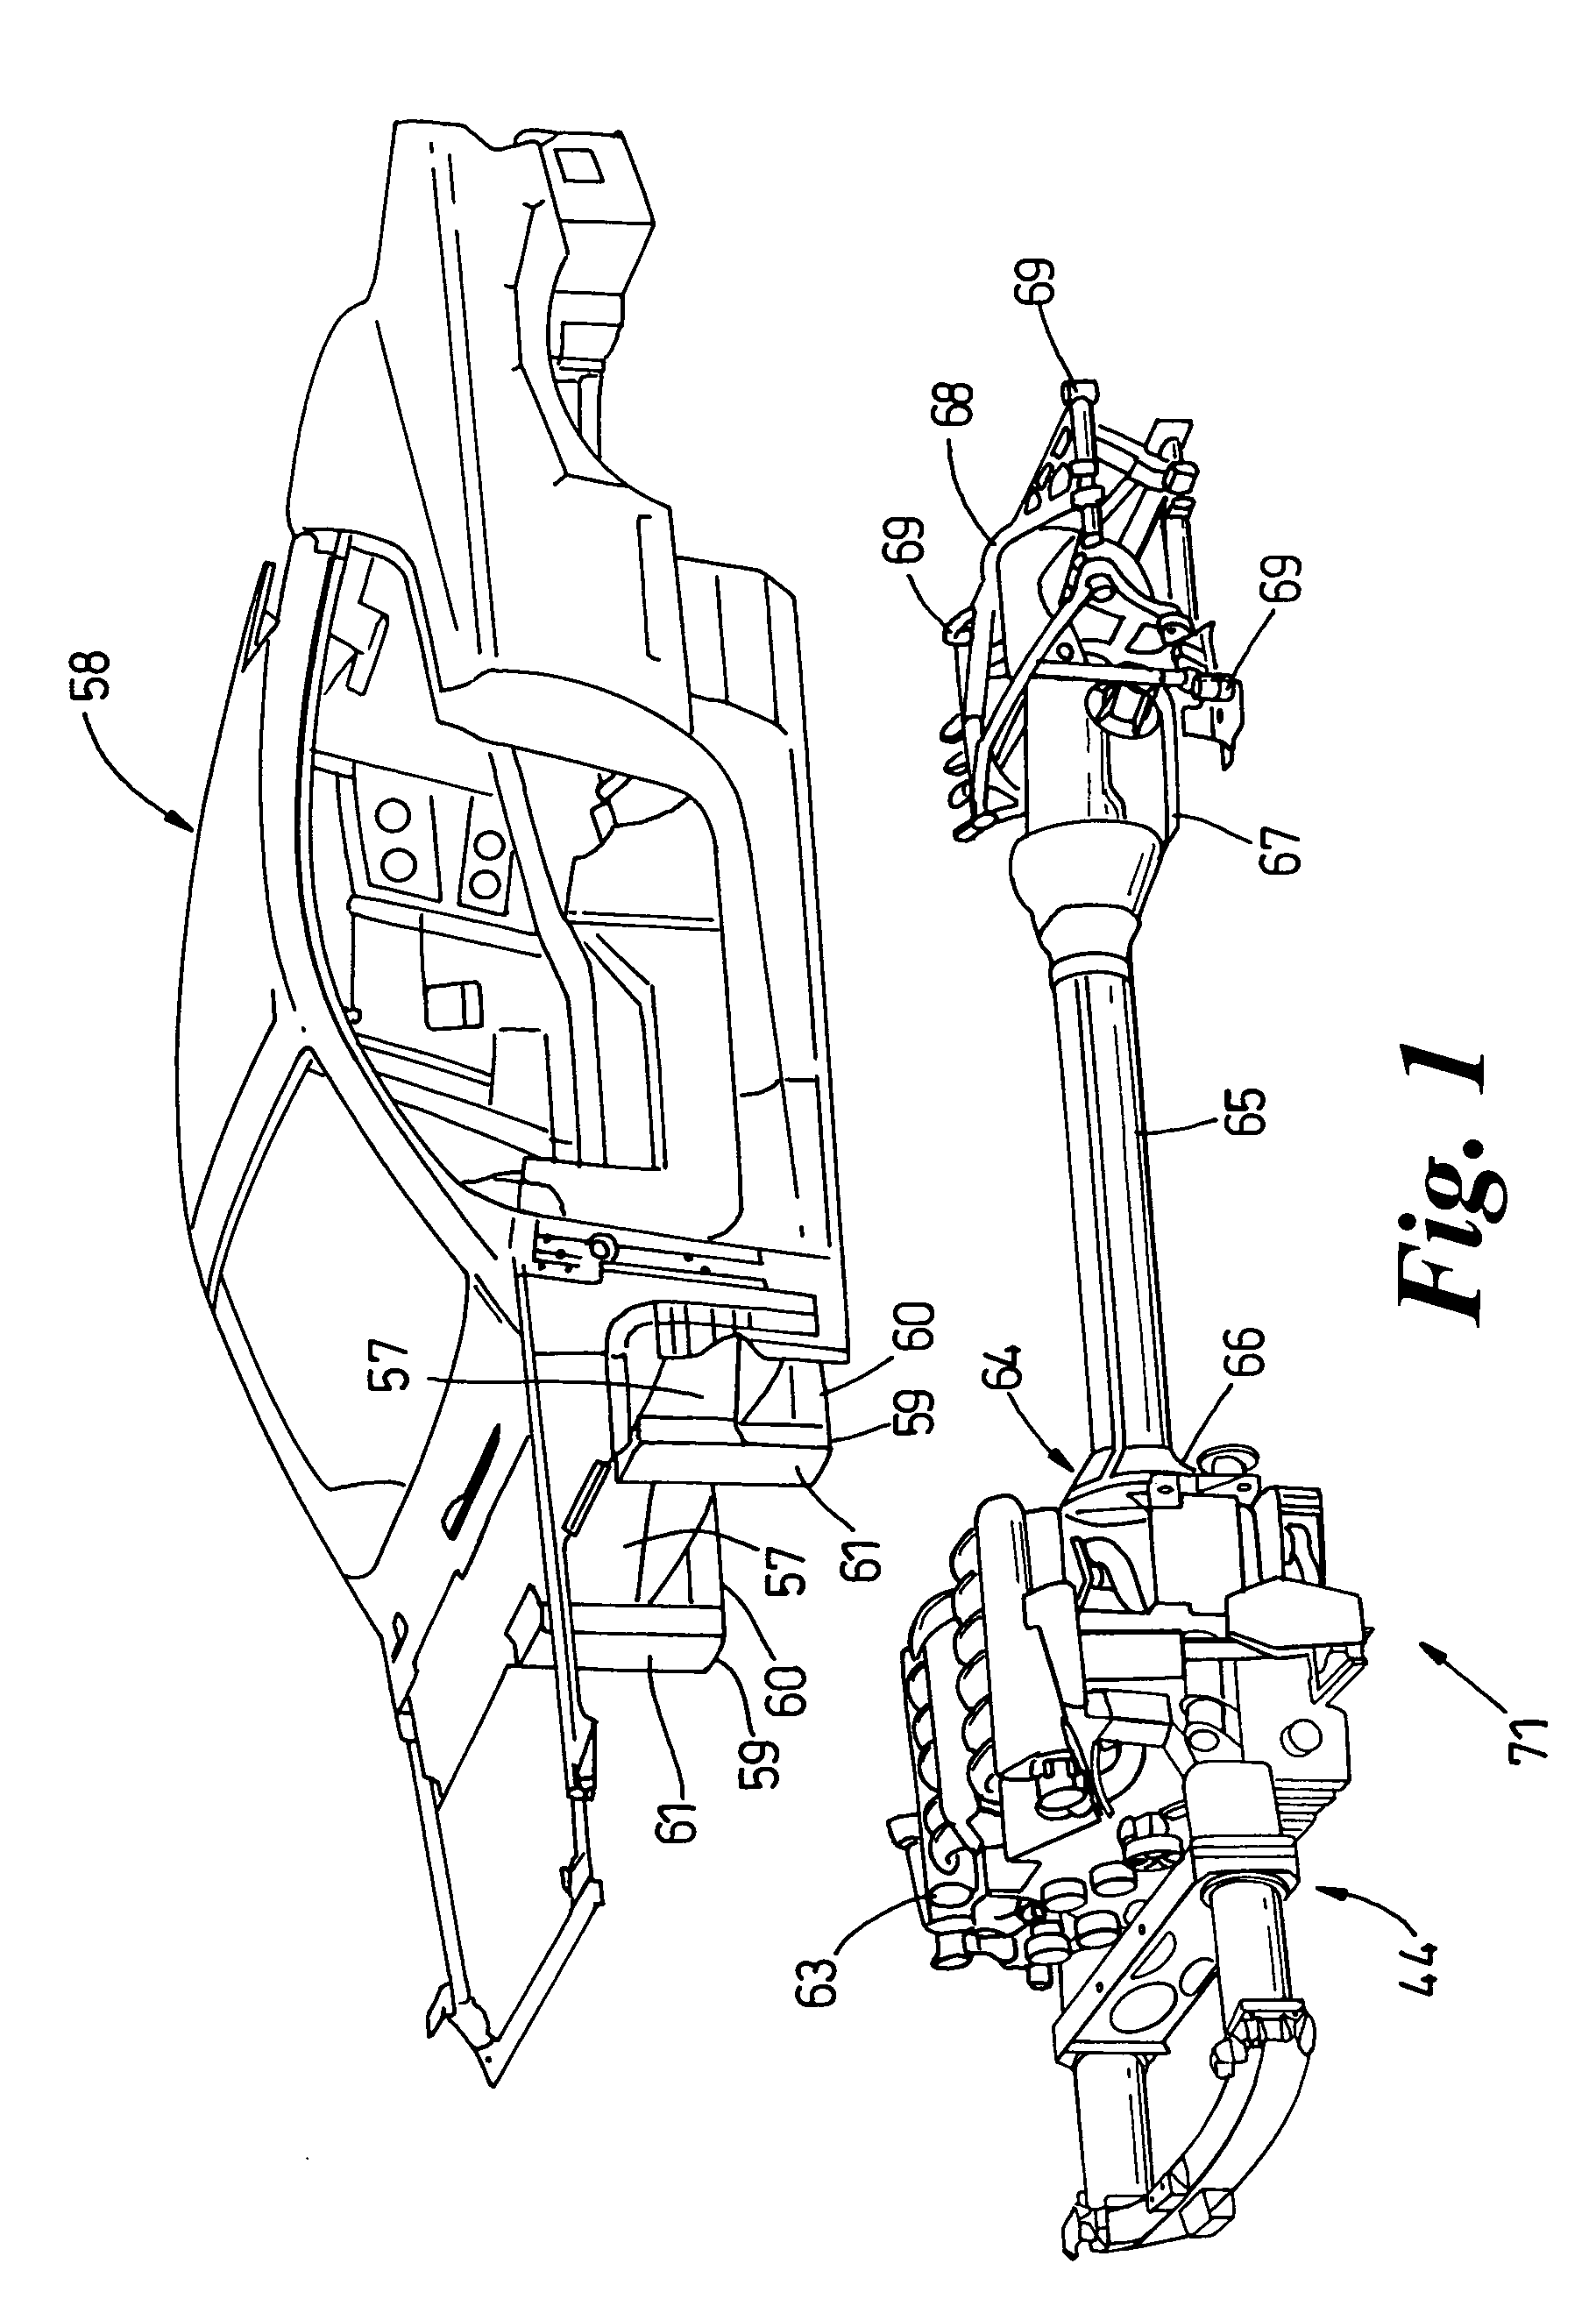 Assembly of motor vehicle body and a power train and chassis module